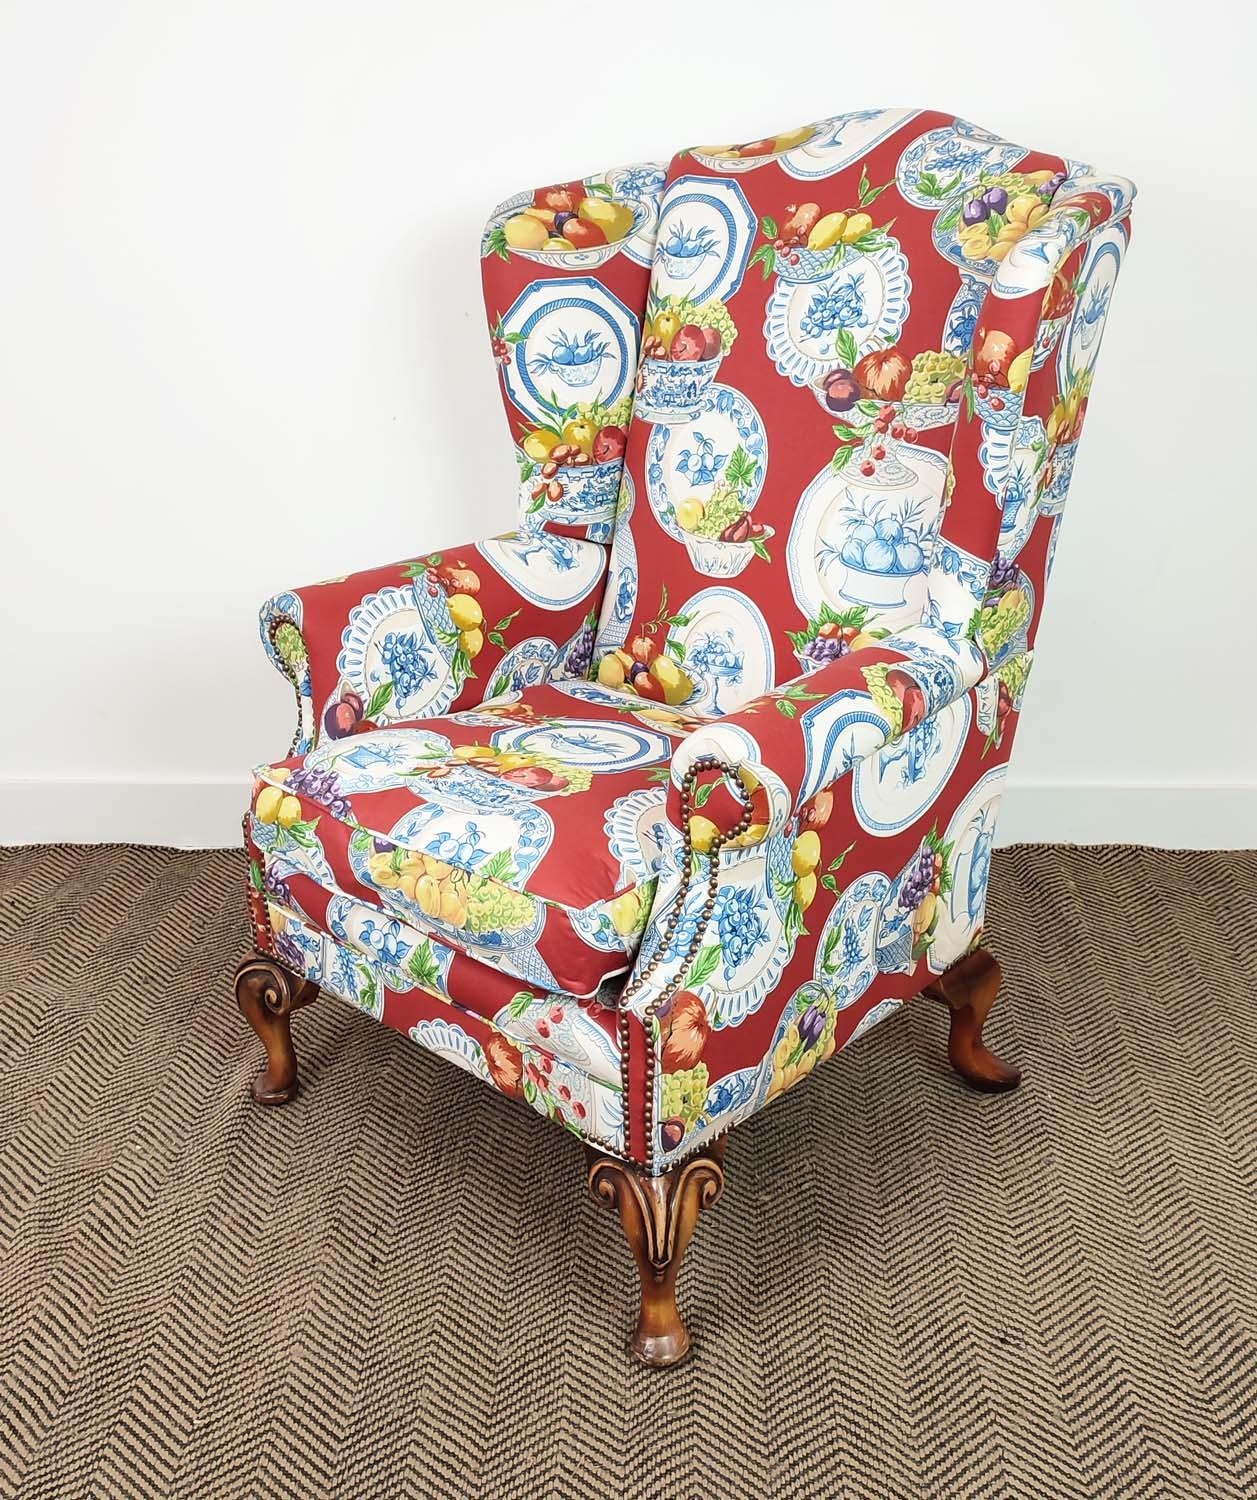 WING ARMCHAIR, Queen Anne style in Jane Churchill fruit bowl patterned fabric, 117cm H x 82cm. - Image 2 of 10